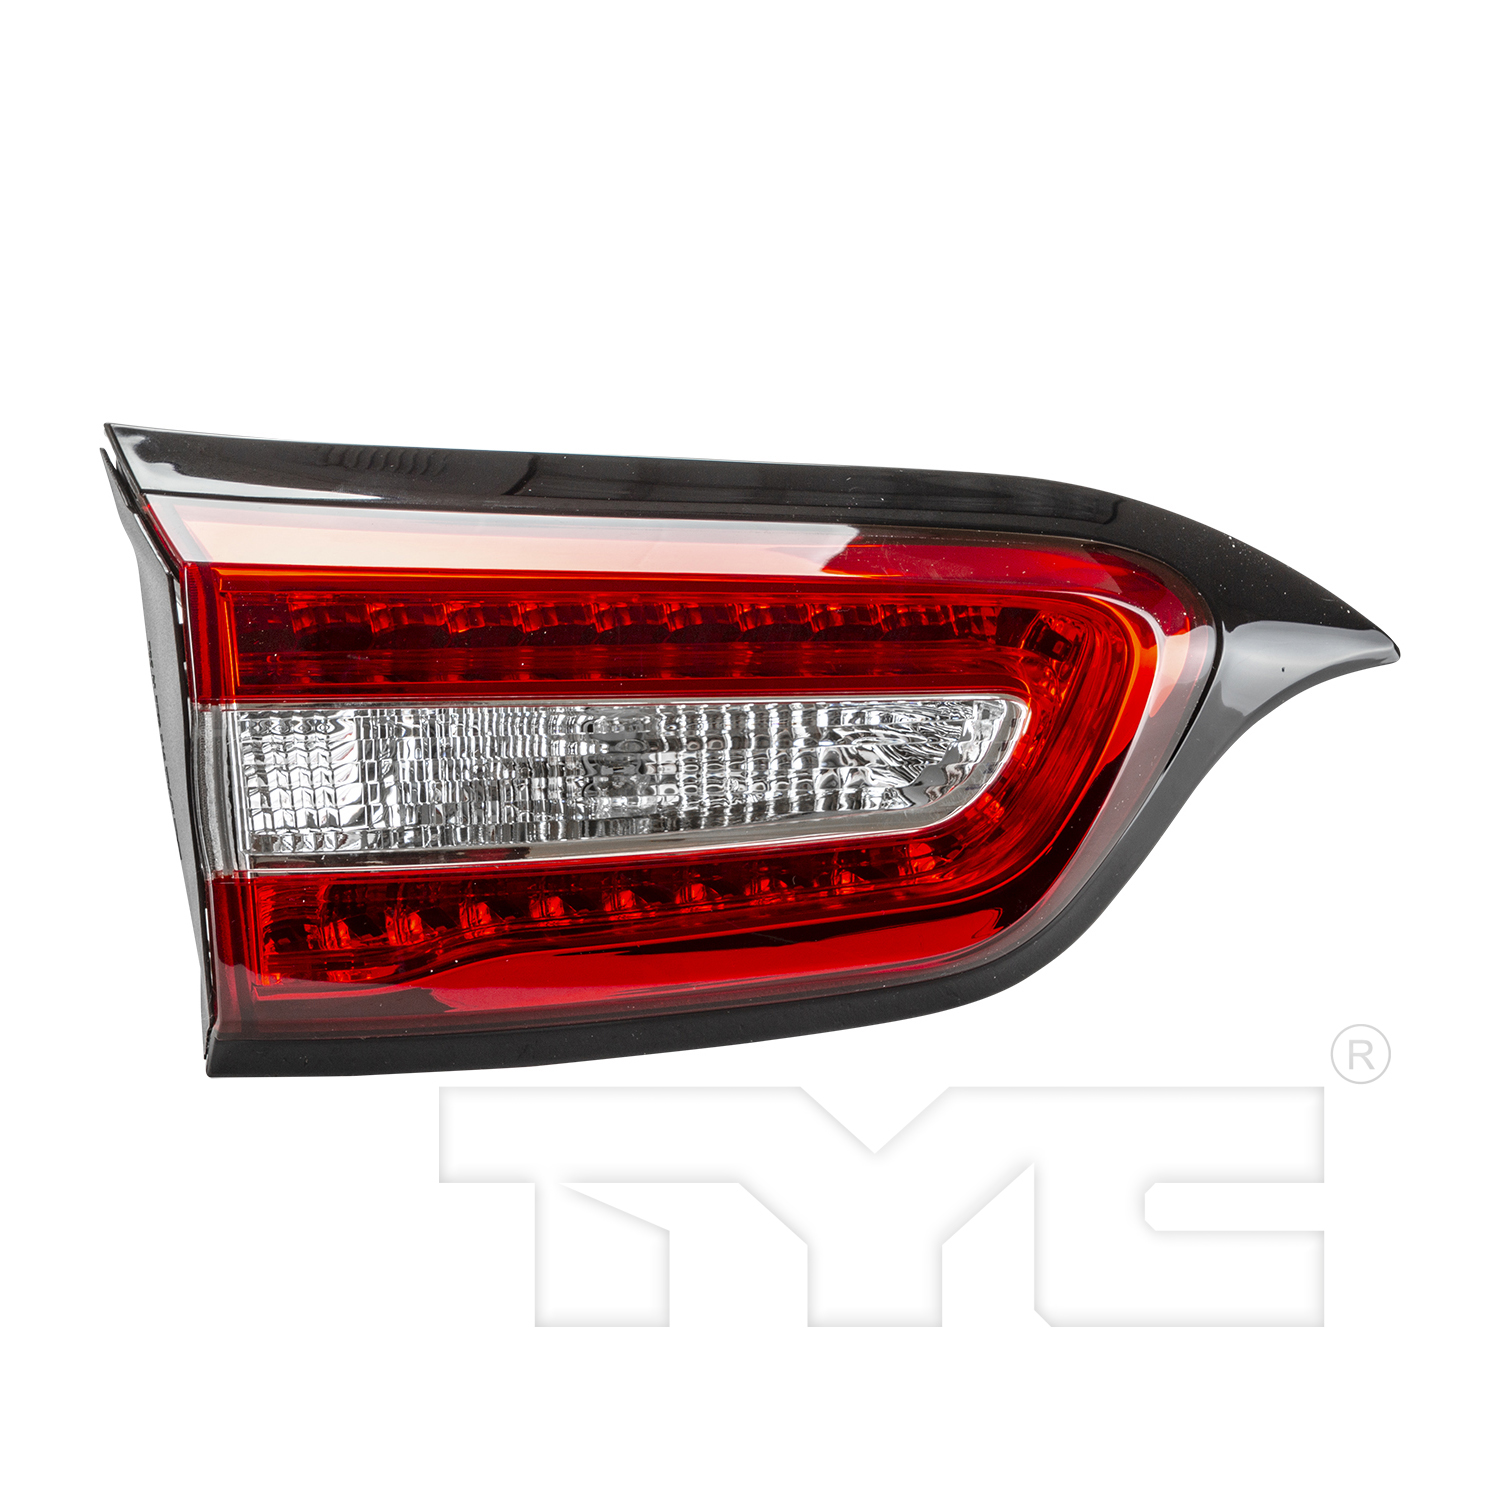 Aftermarket TAILLIGHTS for JEEP - CHEROKEE, CHEROKEE,14-18,LT Taillamp assy inner